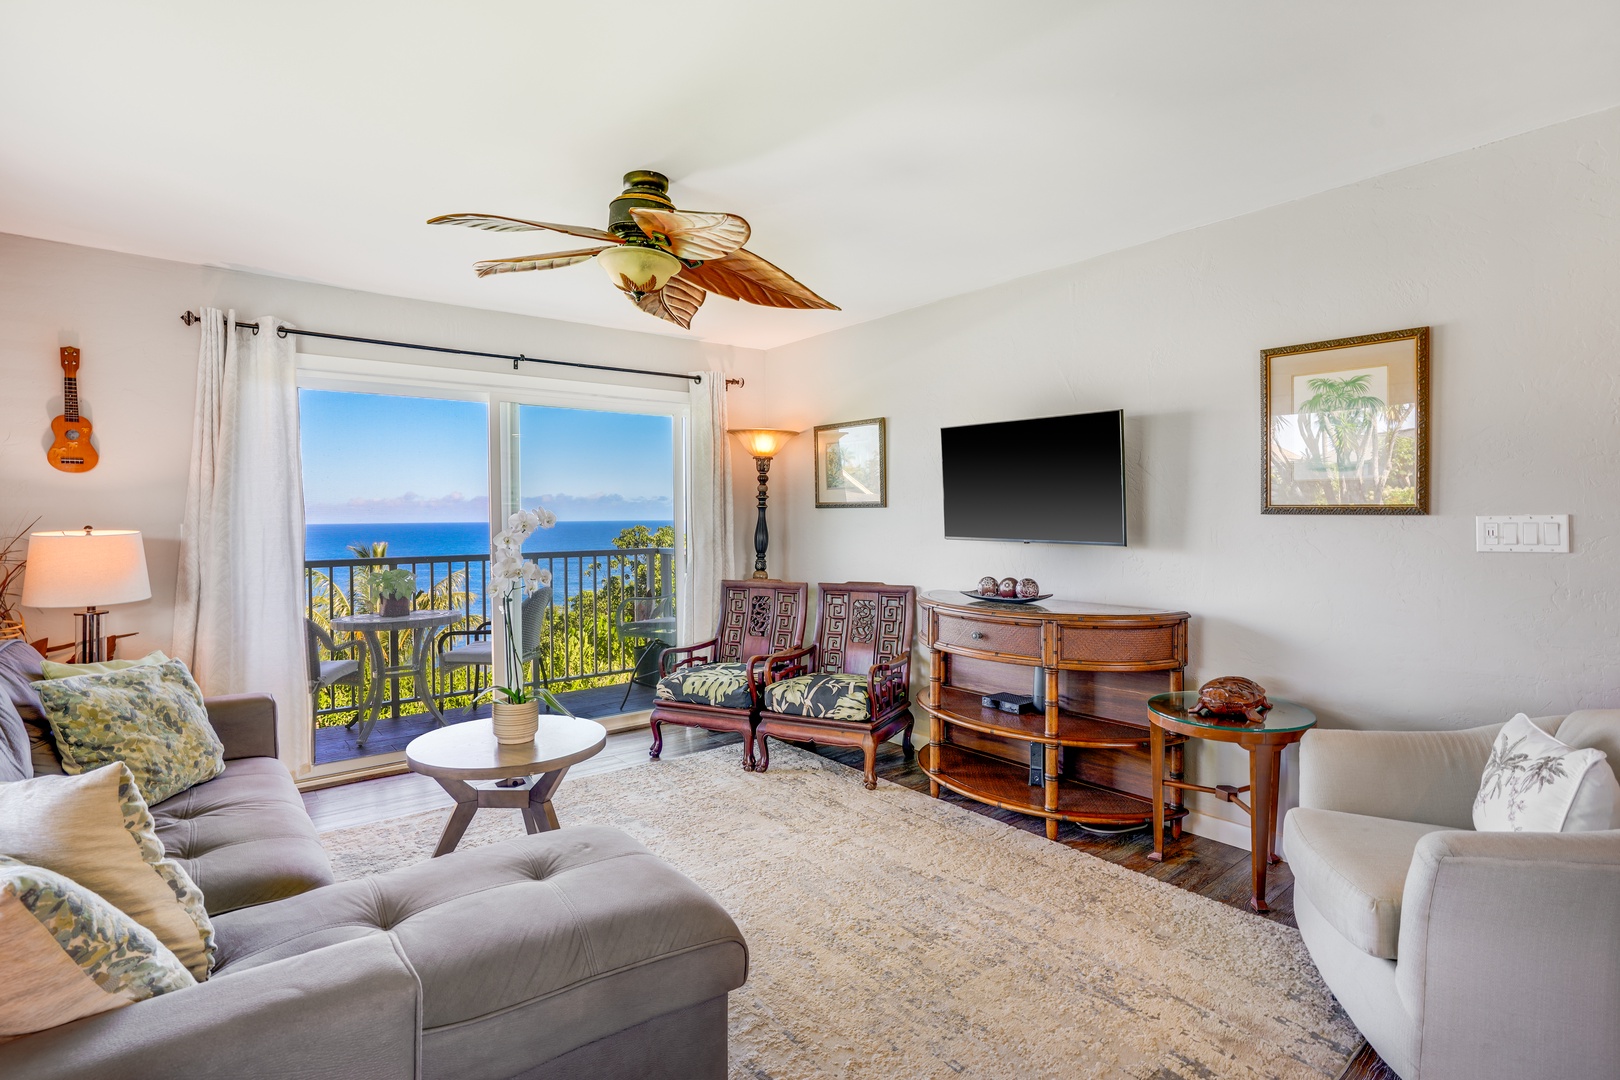 Princeville Vacation Rentals, Alii Kai 7201 - The living area, adorned with plush seating and a large ceiling fan seamlessly connects to the lanai.